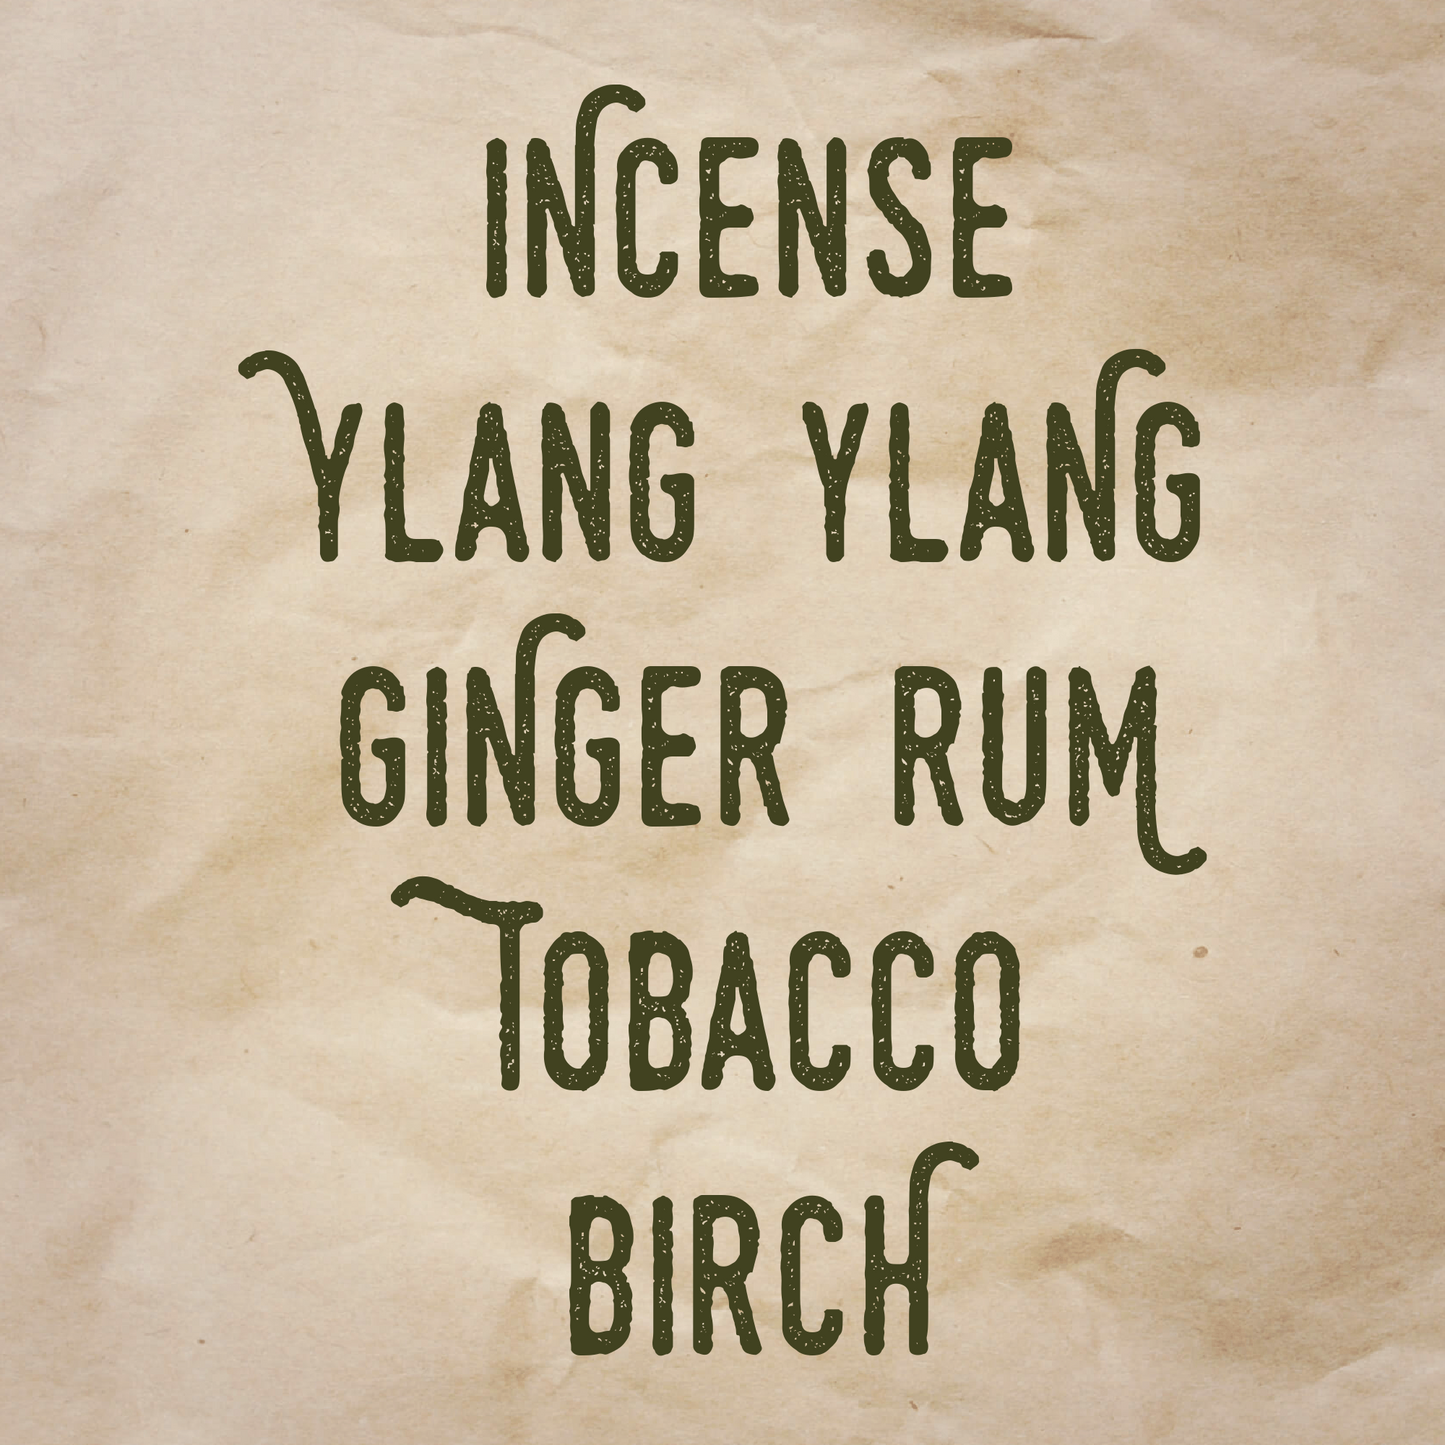 Necromancy scent notes: Incense, ylang ylang, ginger rum, tobacco, and birch.